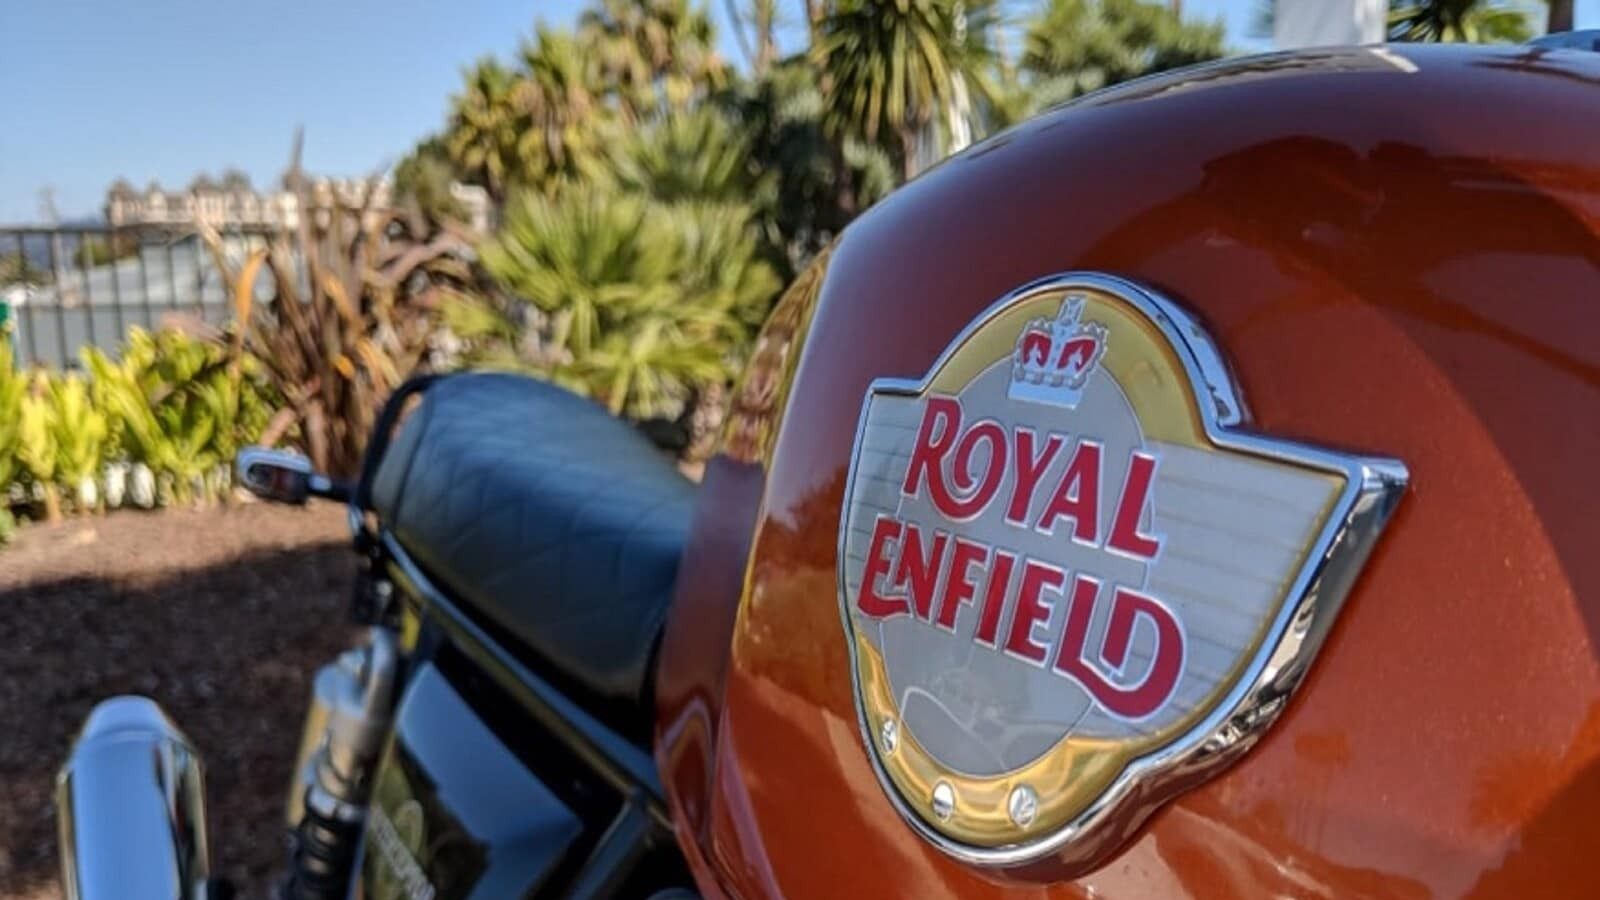 More Pics of Royal Enfield's New Key & Logo on Desert Storm, Classic 350 &  Others